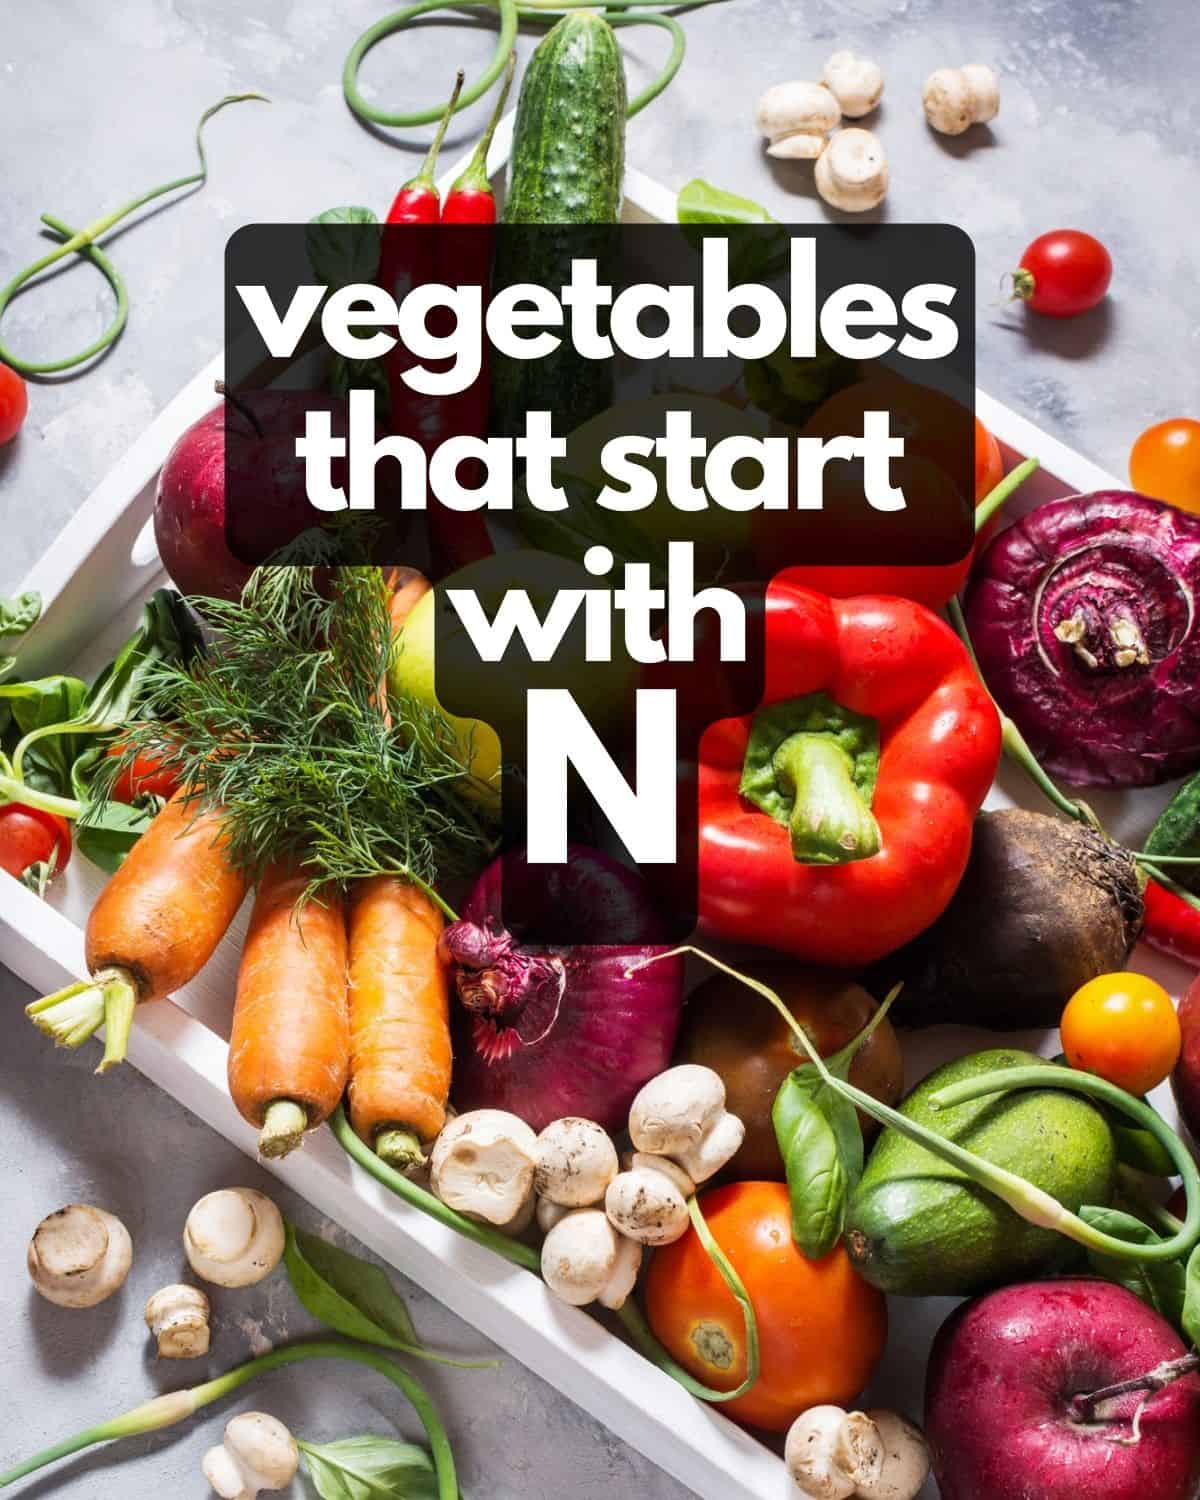 Table of vegetables, plus text: Vegetables that start with N.